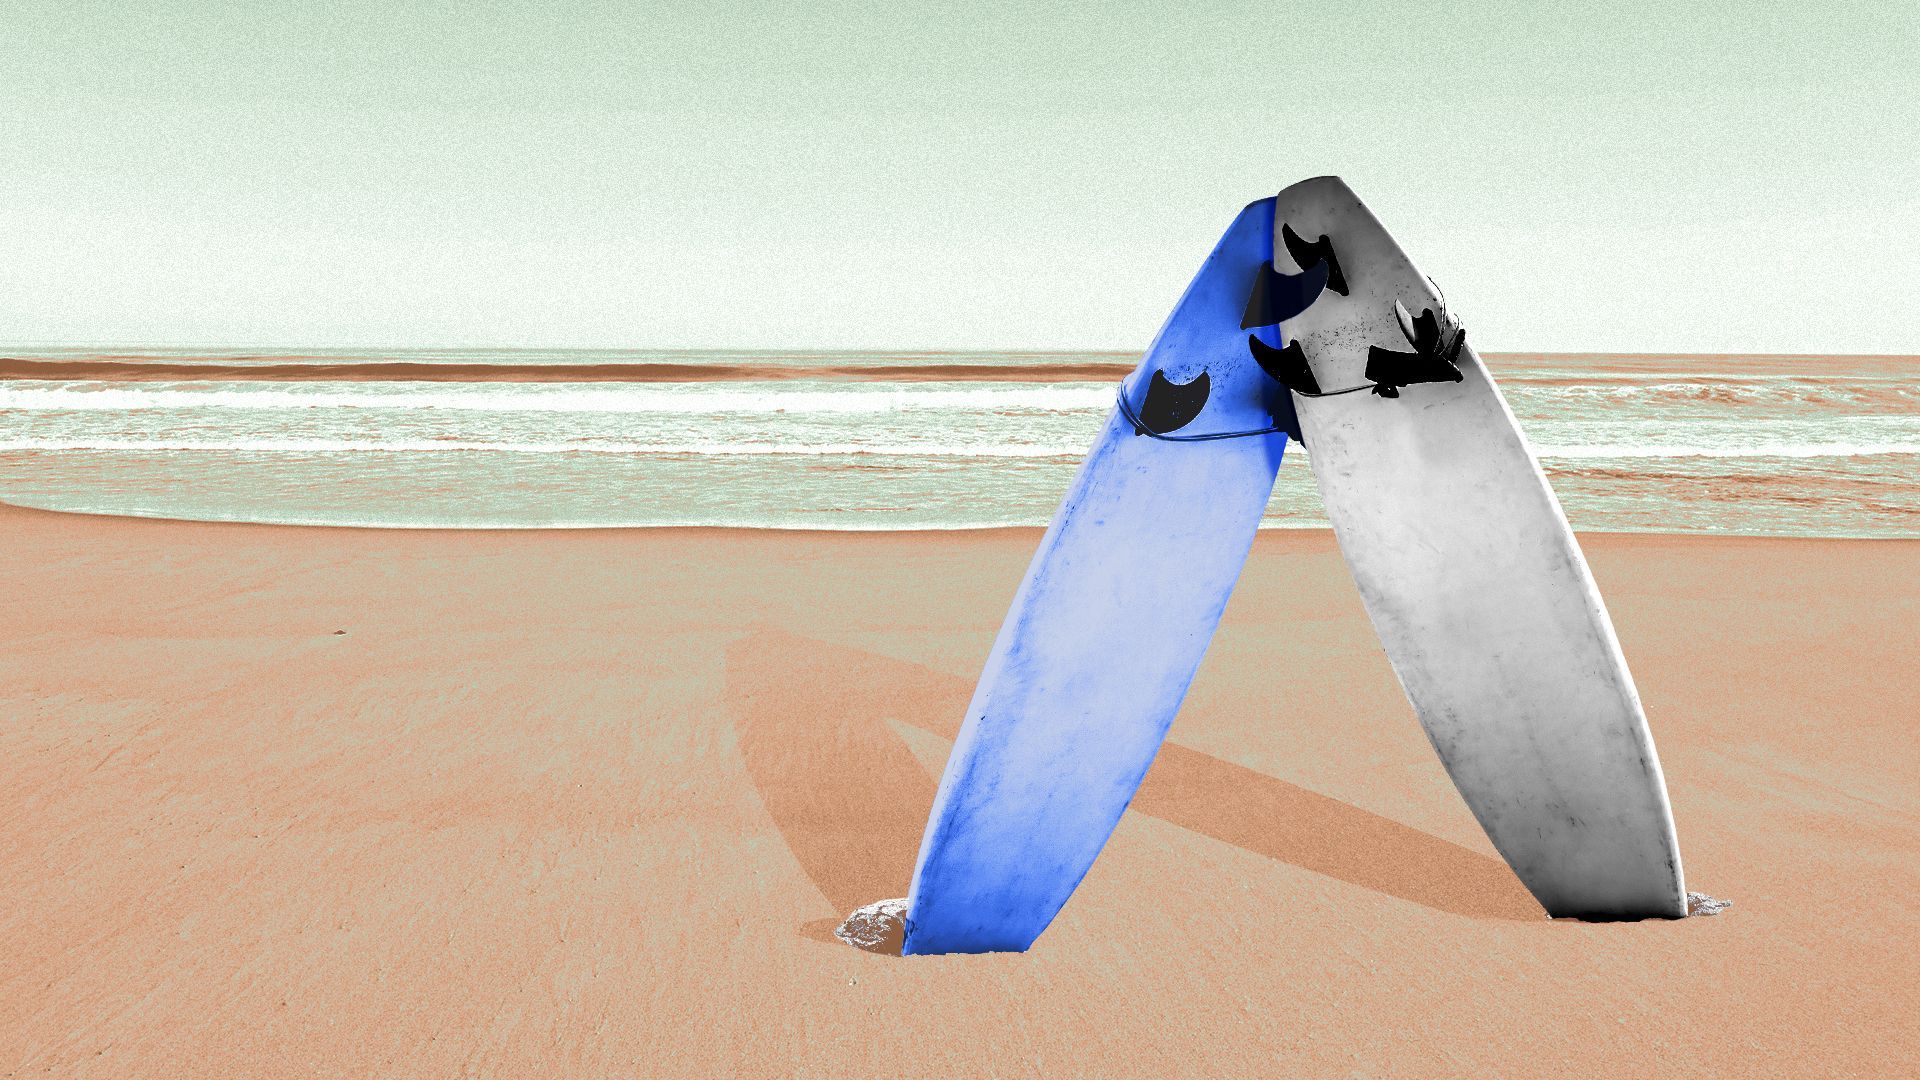 Illustration of two surfboards, one blue, one white, stuck in the sand on a beach, arranged to form the Axios A logo.